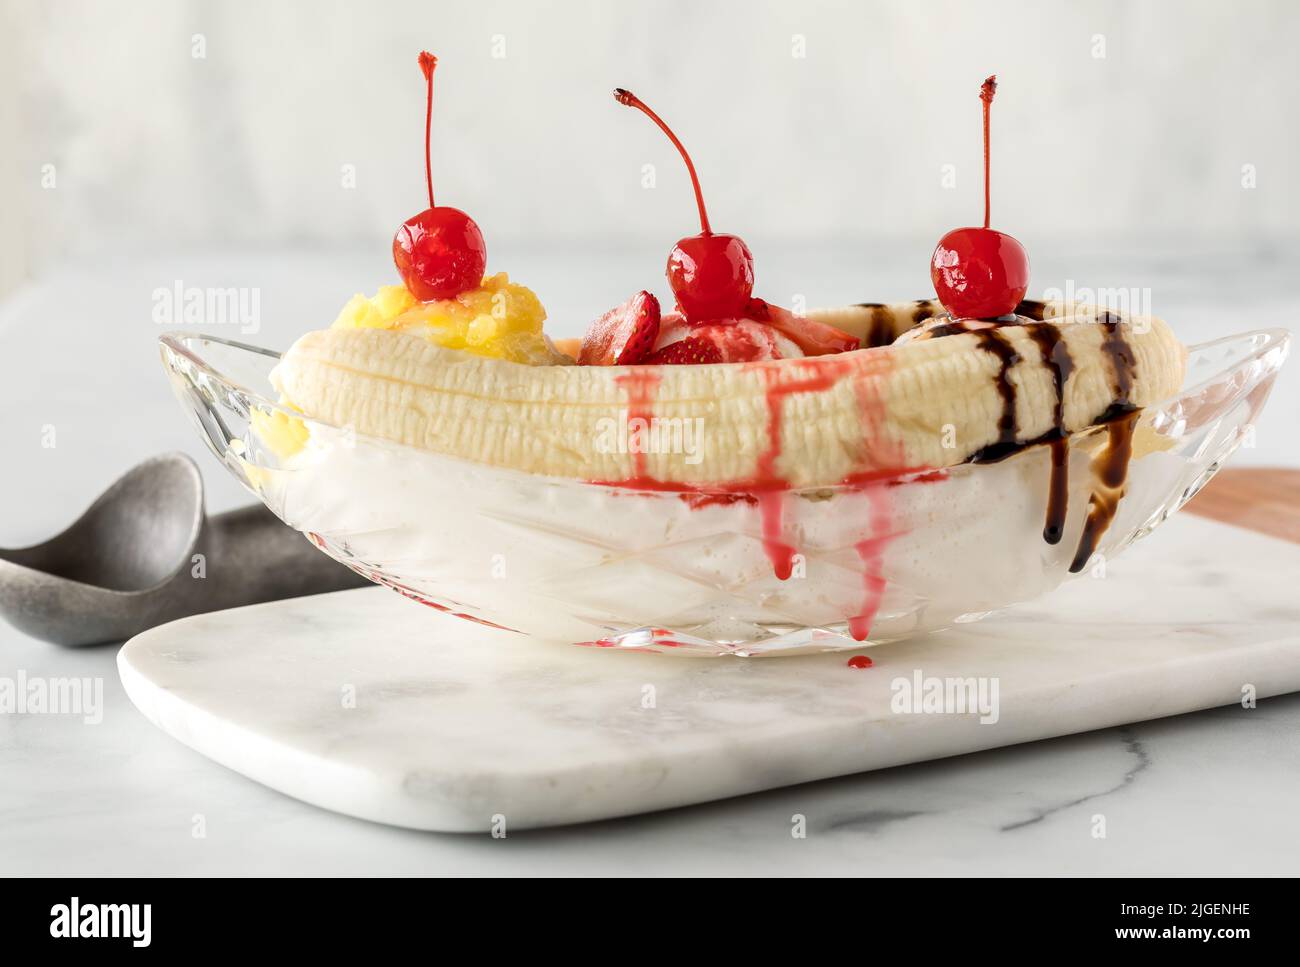 Creamy and delicious banana split on a marble slab, ready for eating. Stock Photo